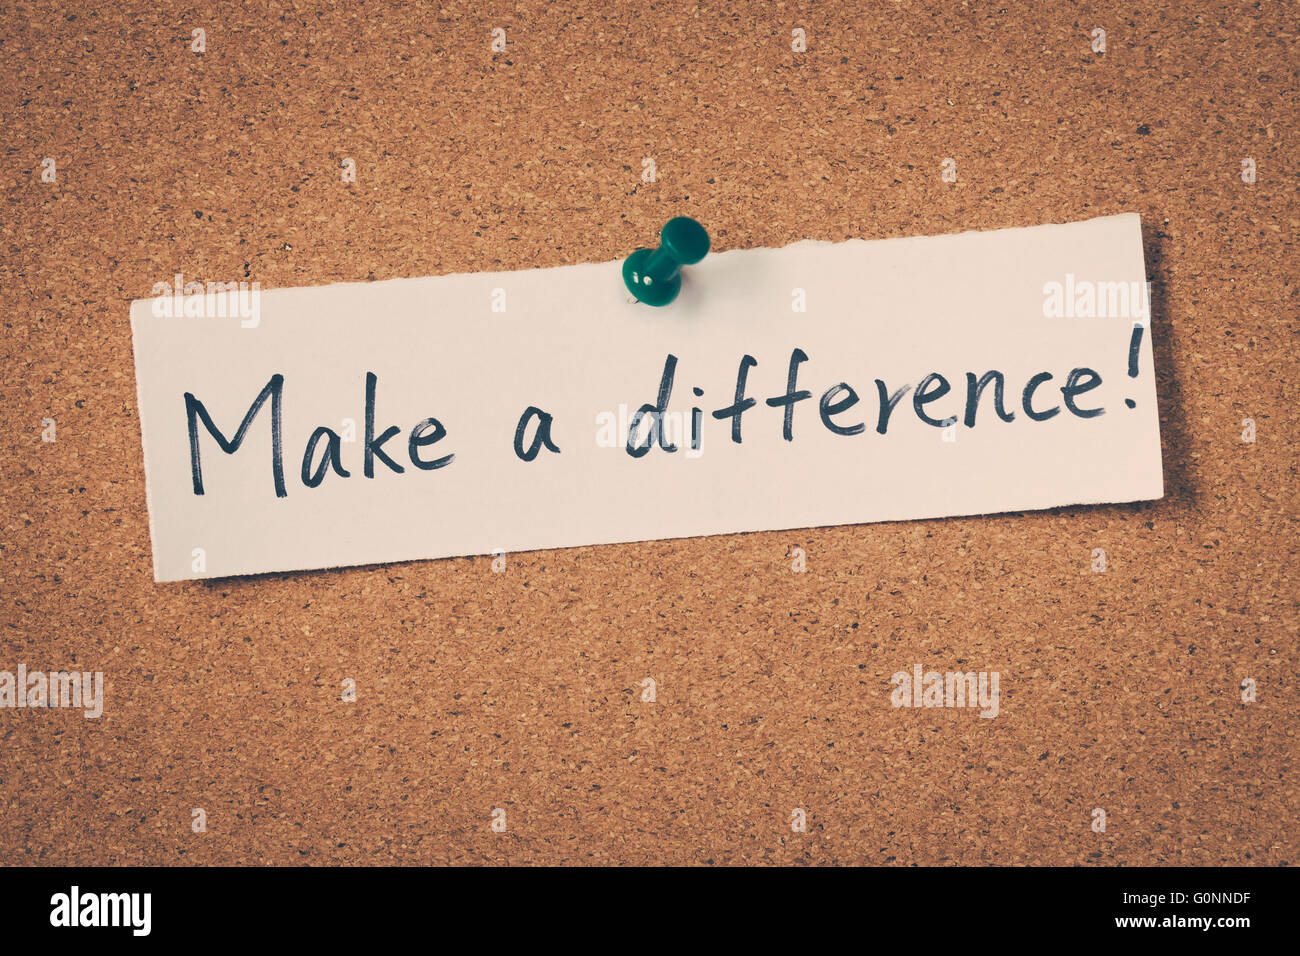 Make a difference Stock Photo